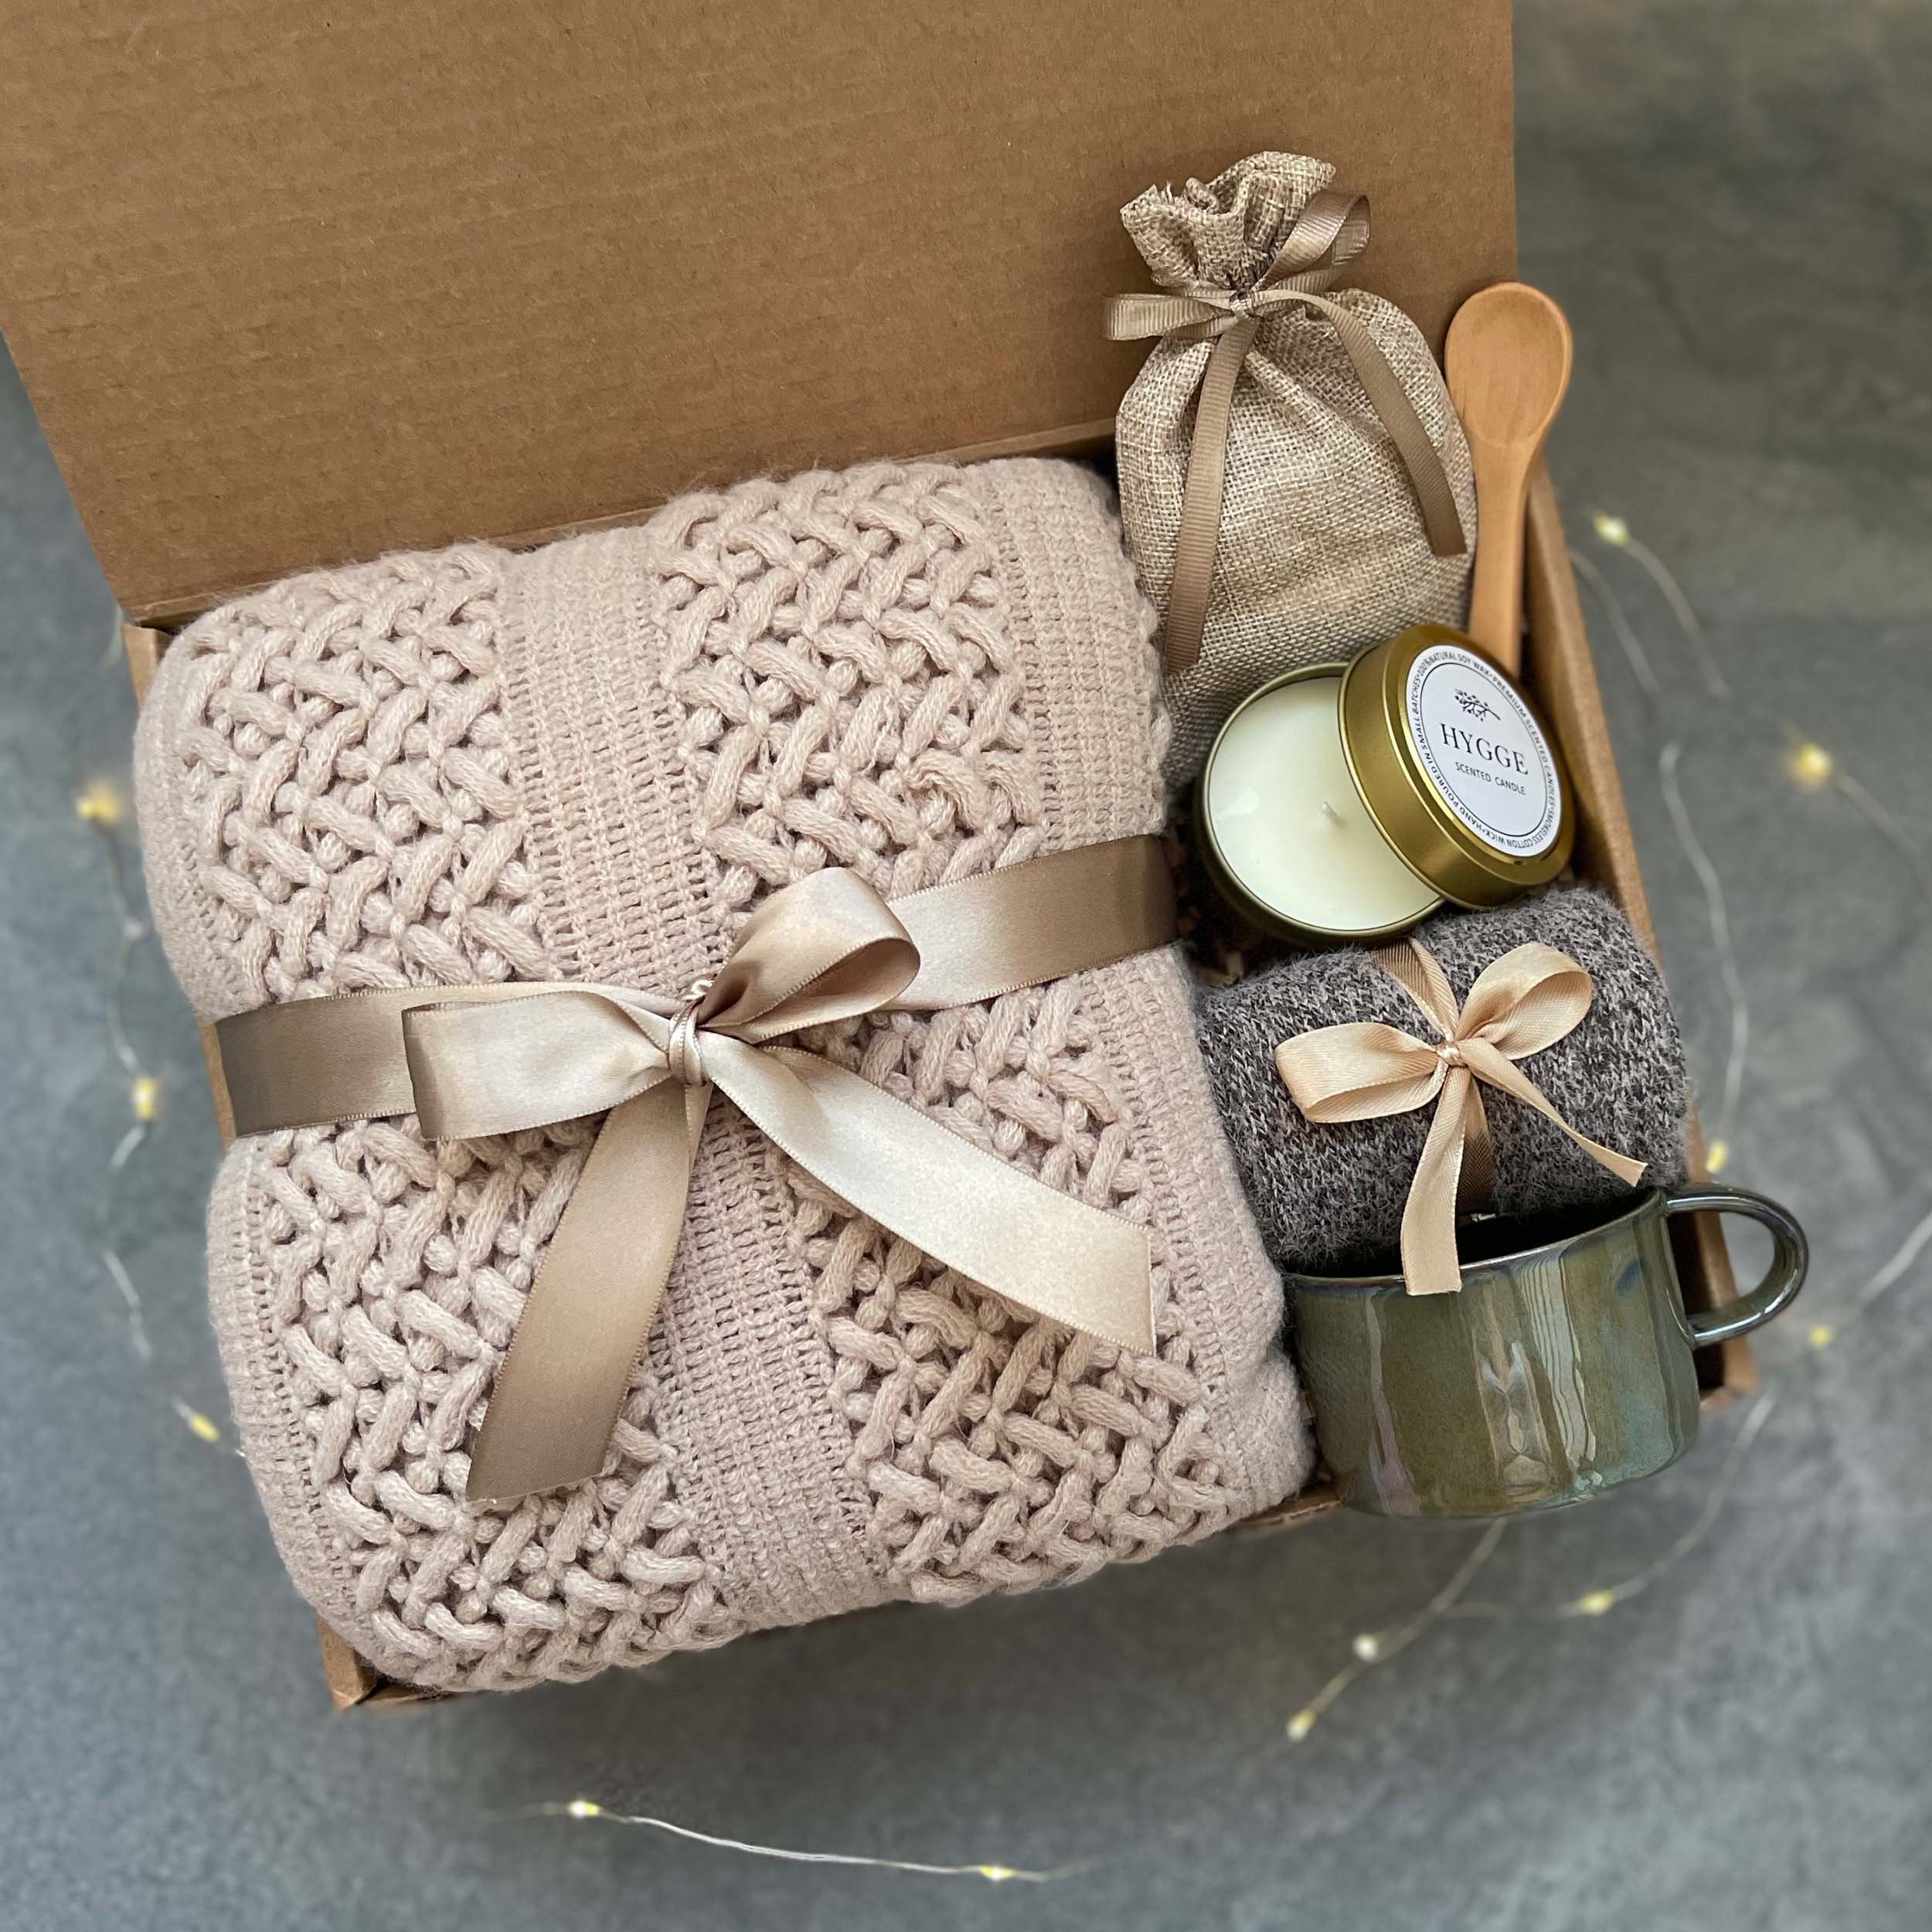 Birthday Gifts for women, Get Well Soon Gifts Basket, Self Care Gifts for  Women, Care Package, Spiritual Gift Set for Women, Crystal Candle, Beaded